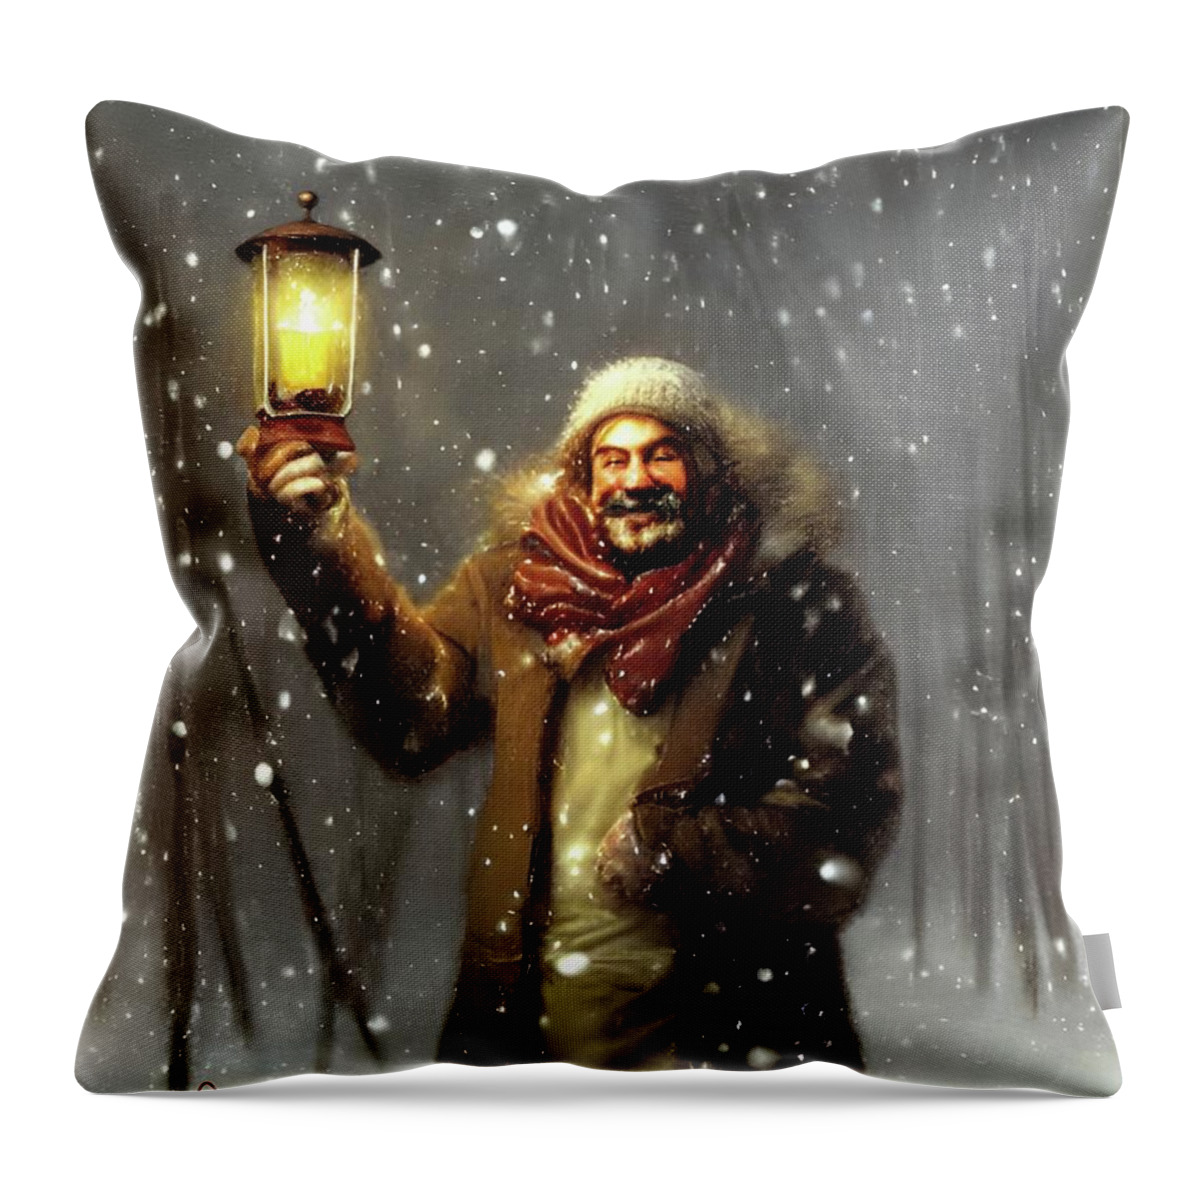 Snowstorm Throw Pillow featuring the digital art Welcoming Fellow in the Snow by Annalisa Rivera-Franz